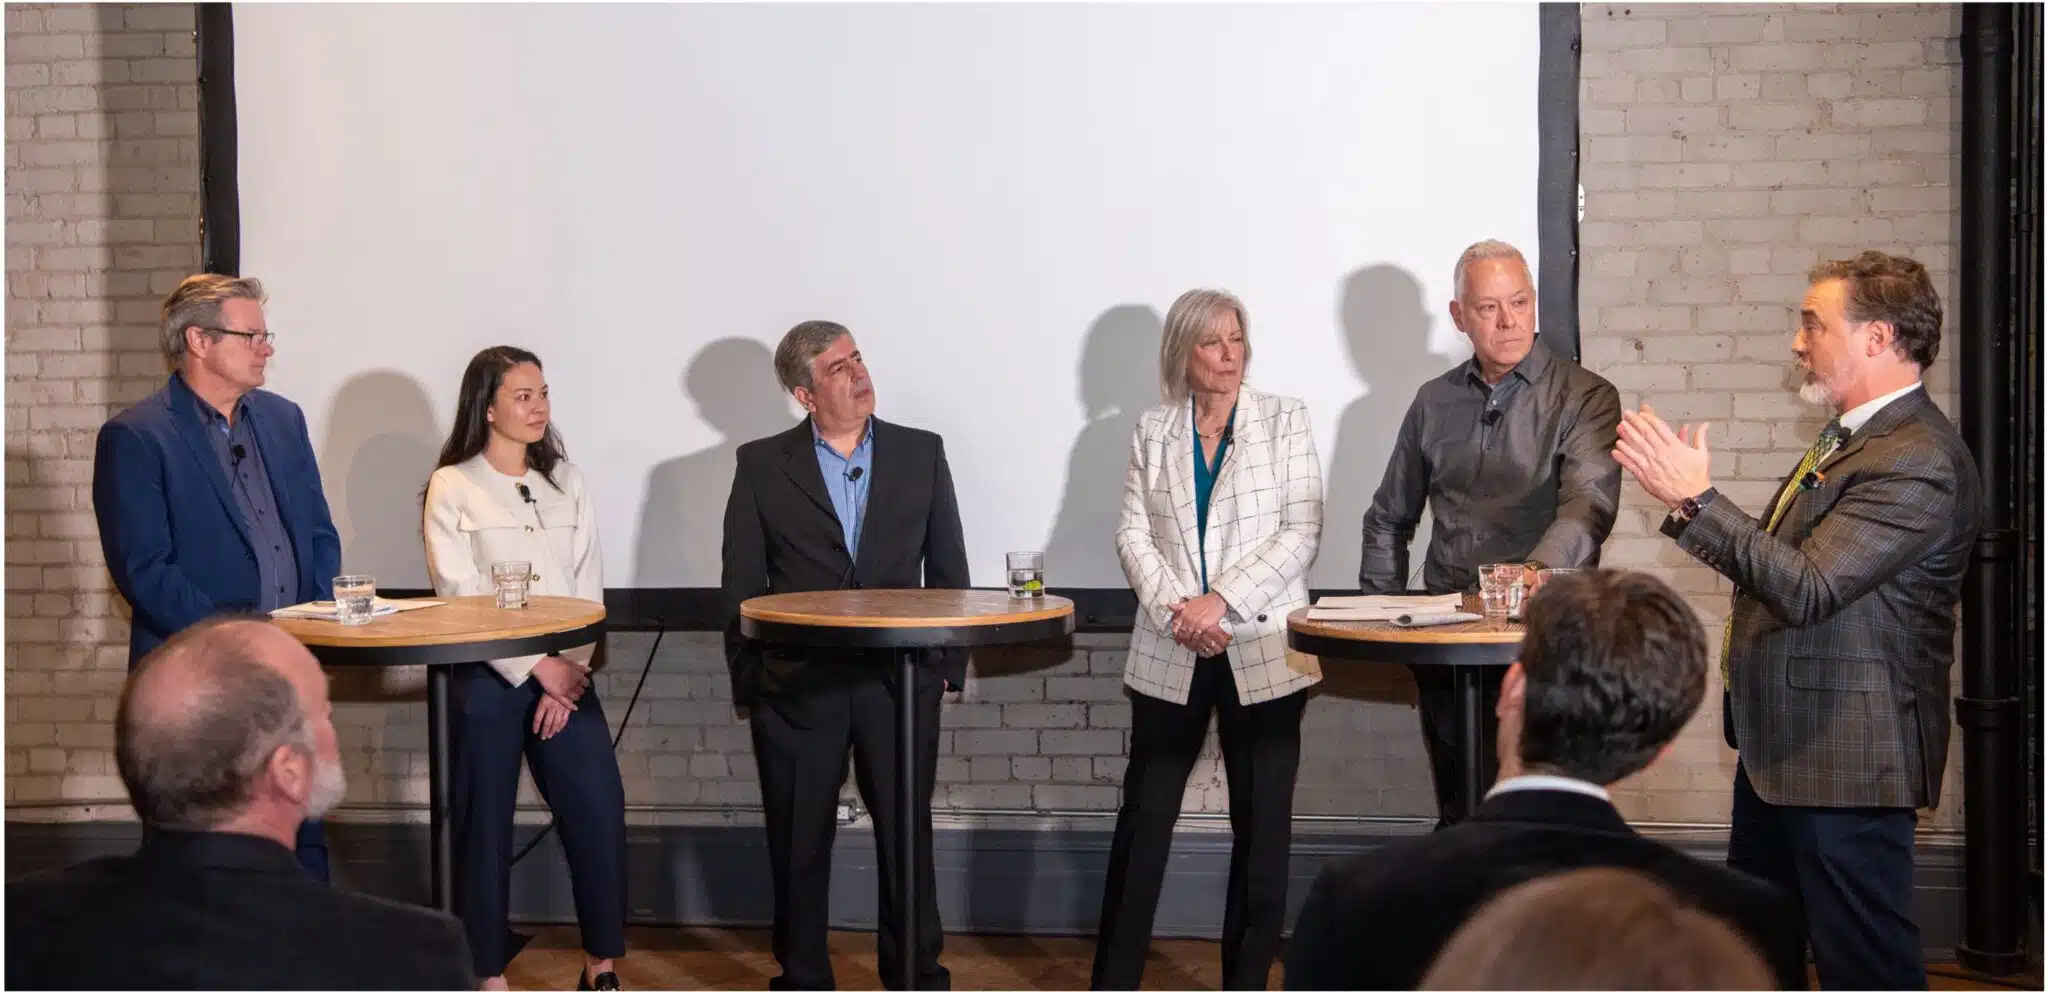 A photo of 6 presenters casually standing in front of a projector screen